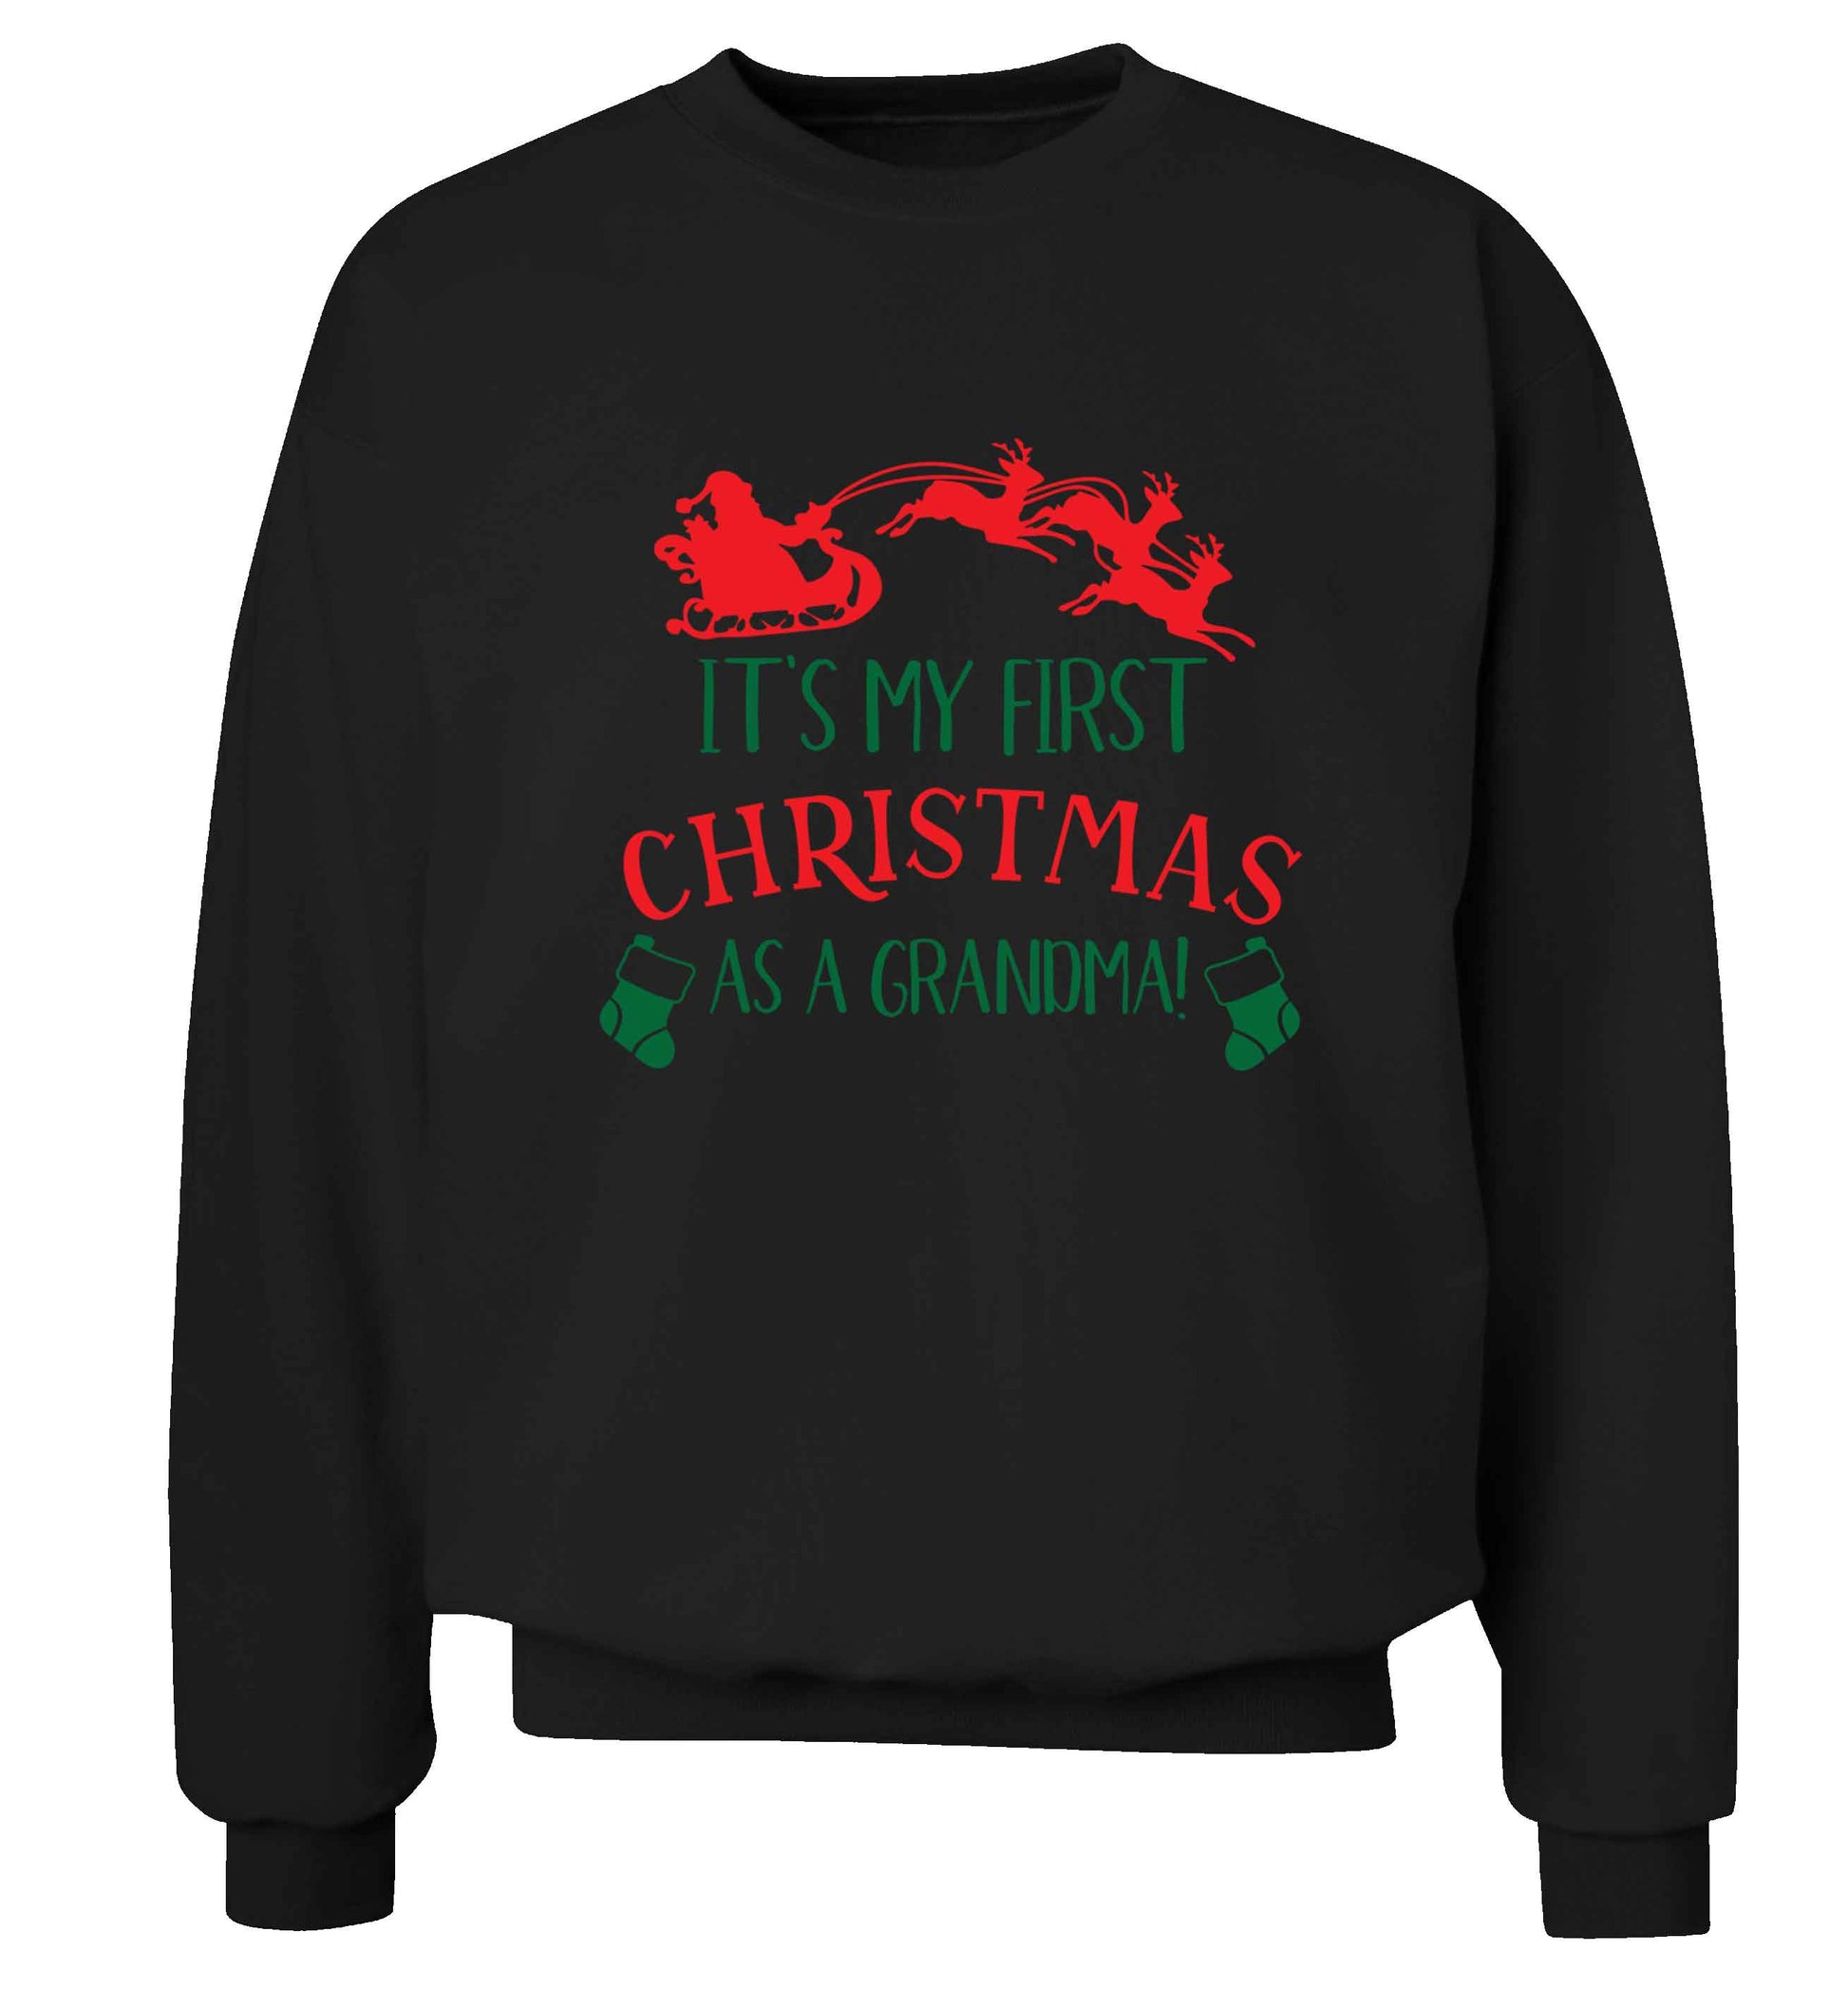 It's my first Christmas as a grandma! Adult's unisex black Sweater 2XL